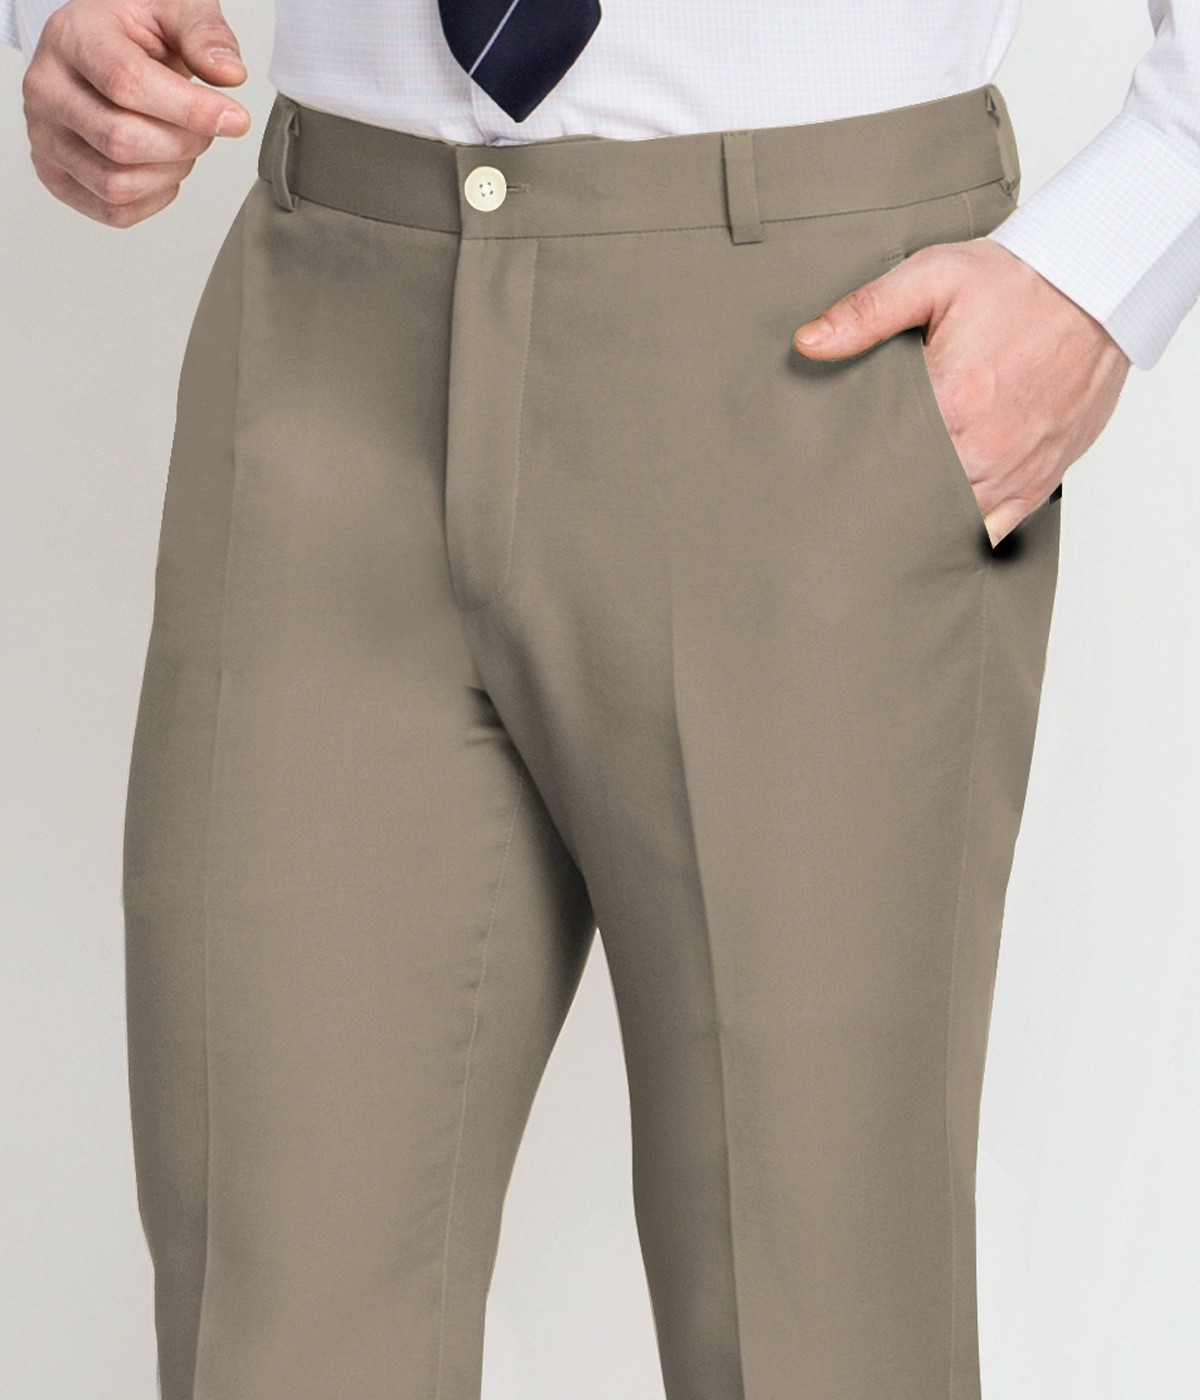 Dockers Men's Classic Fit Signature Khaki Lux Cotton Stretch Pants-Pleated  (Regular and Big & Tall), Cloud, 30W x 30L at Amazon Men's Clothing store